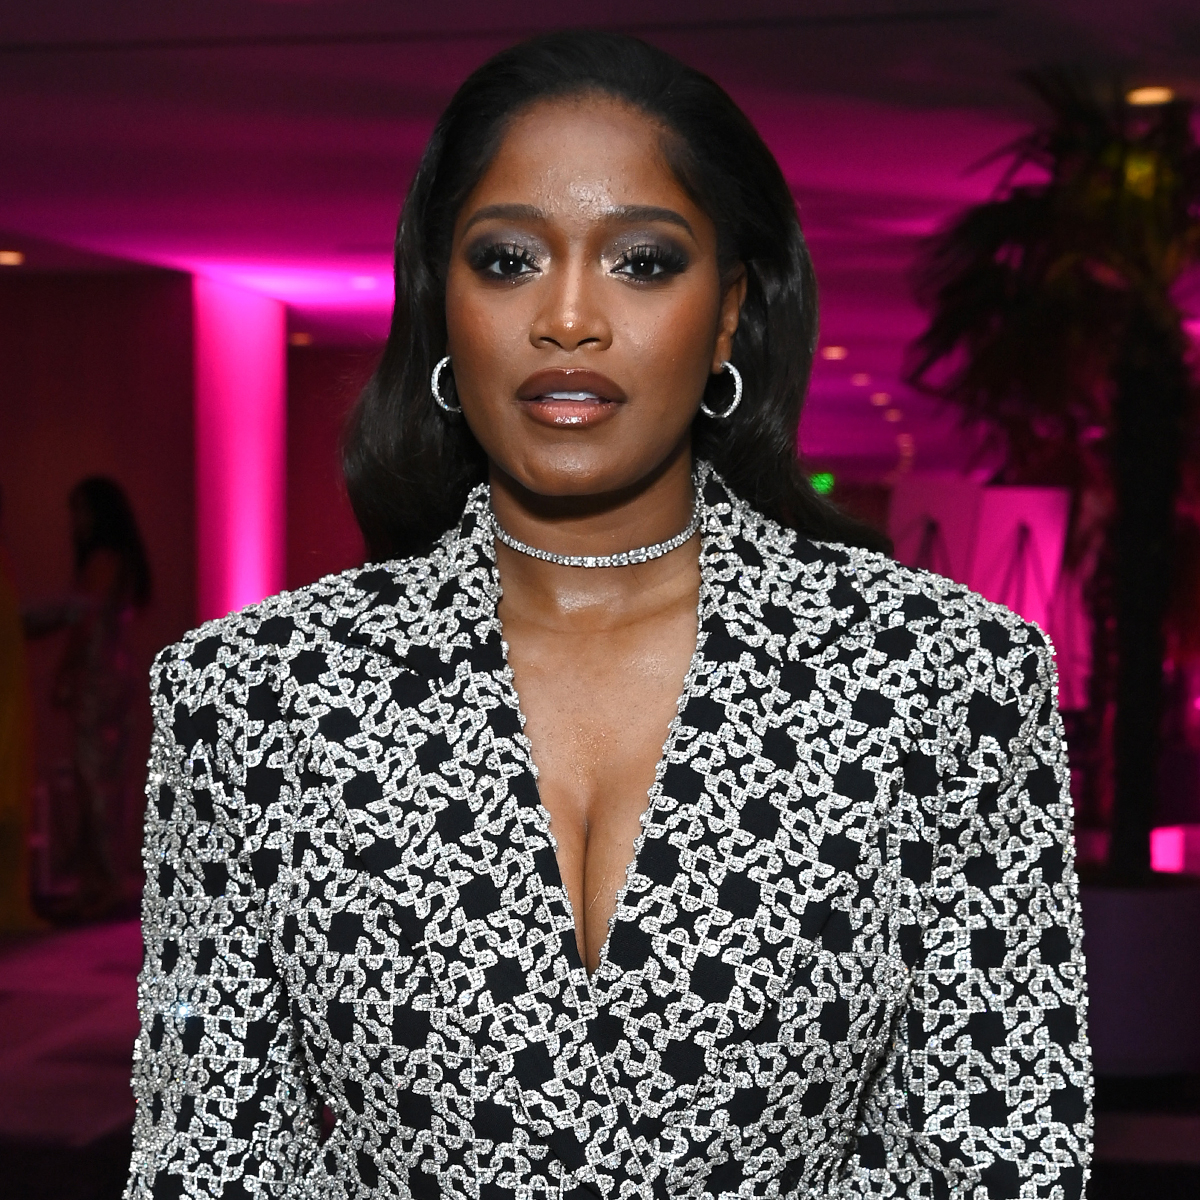 Keke Palmer Says Her Sexuality & Gender Identity Has Been “Confusion”